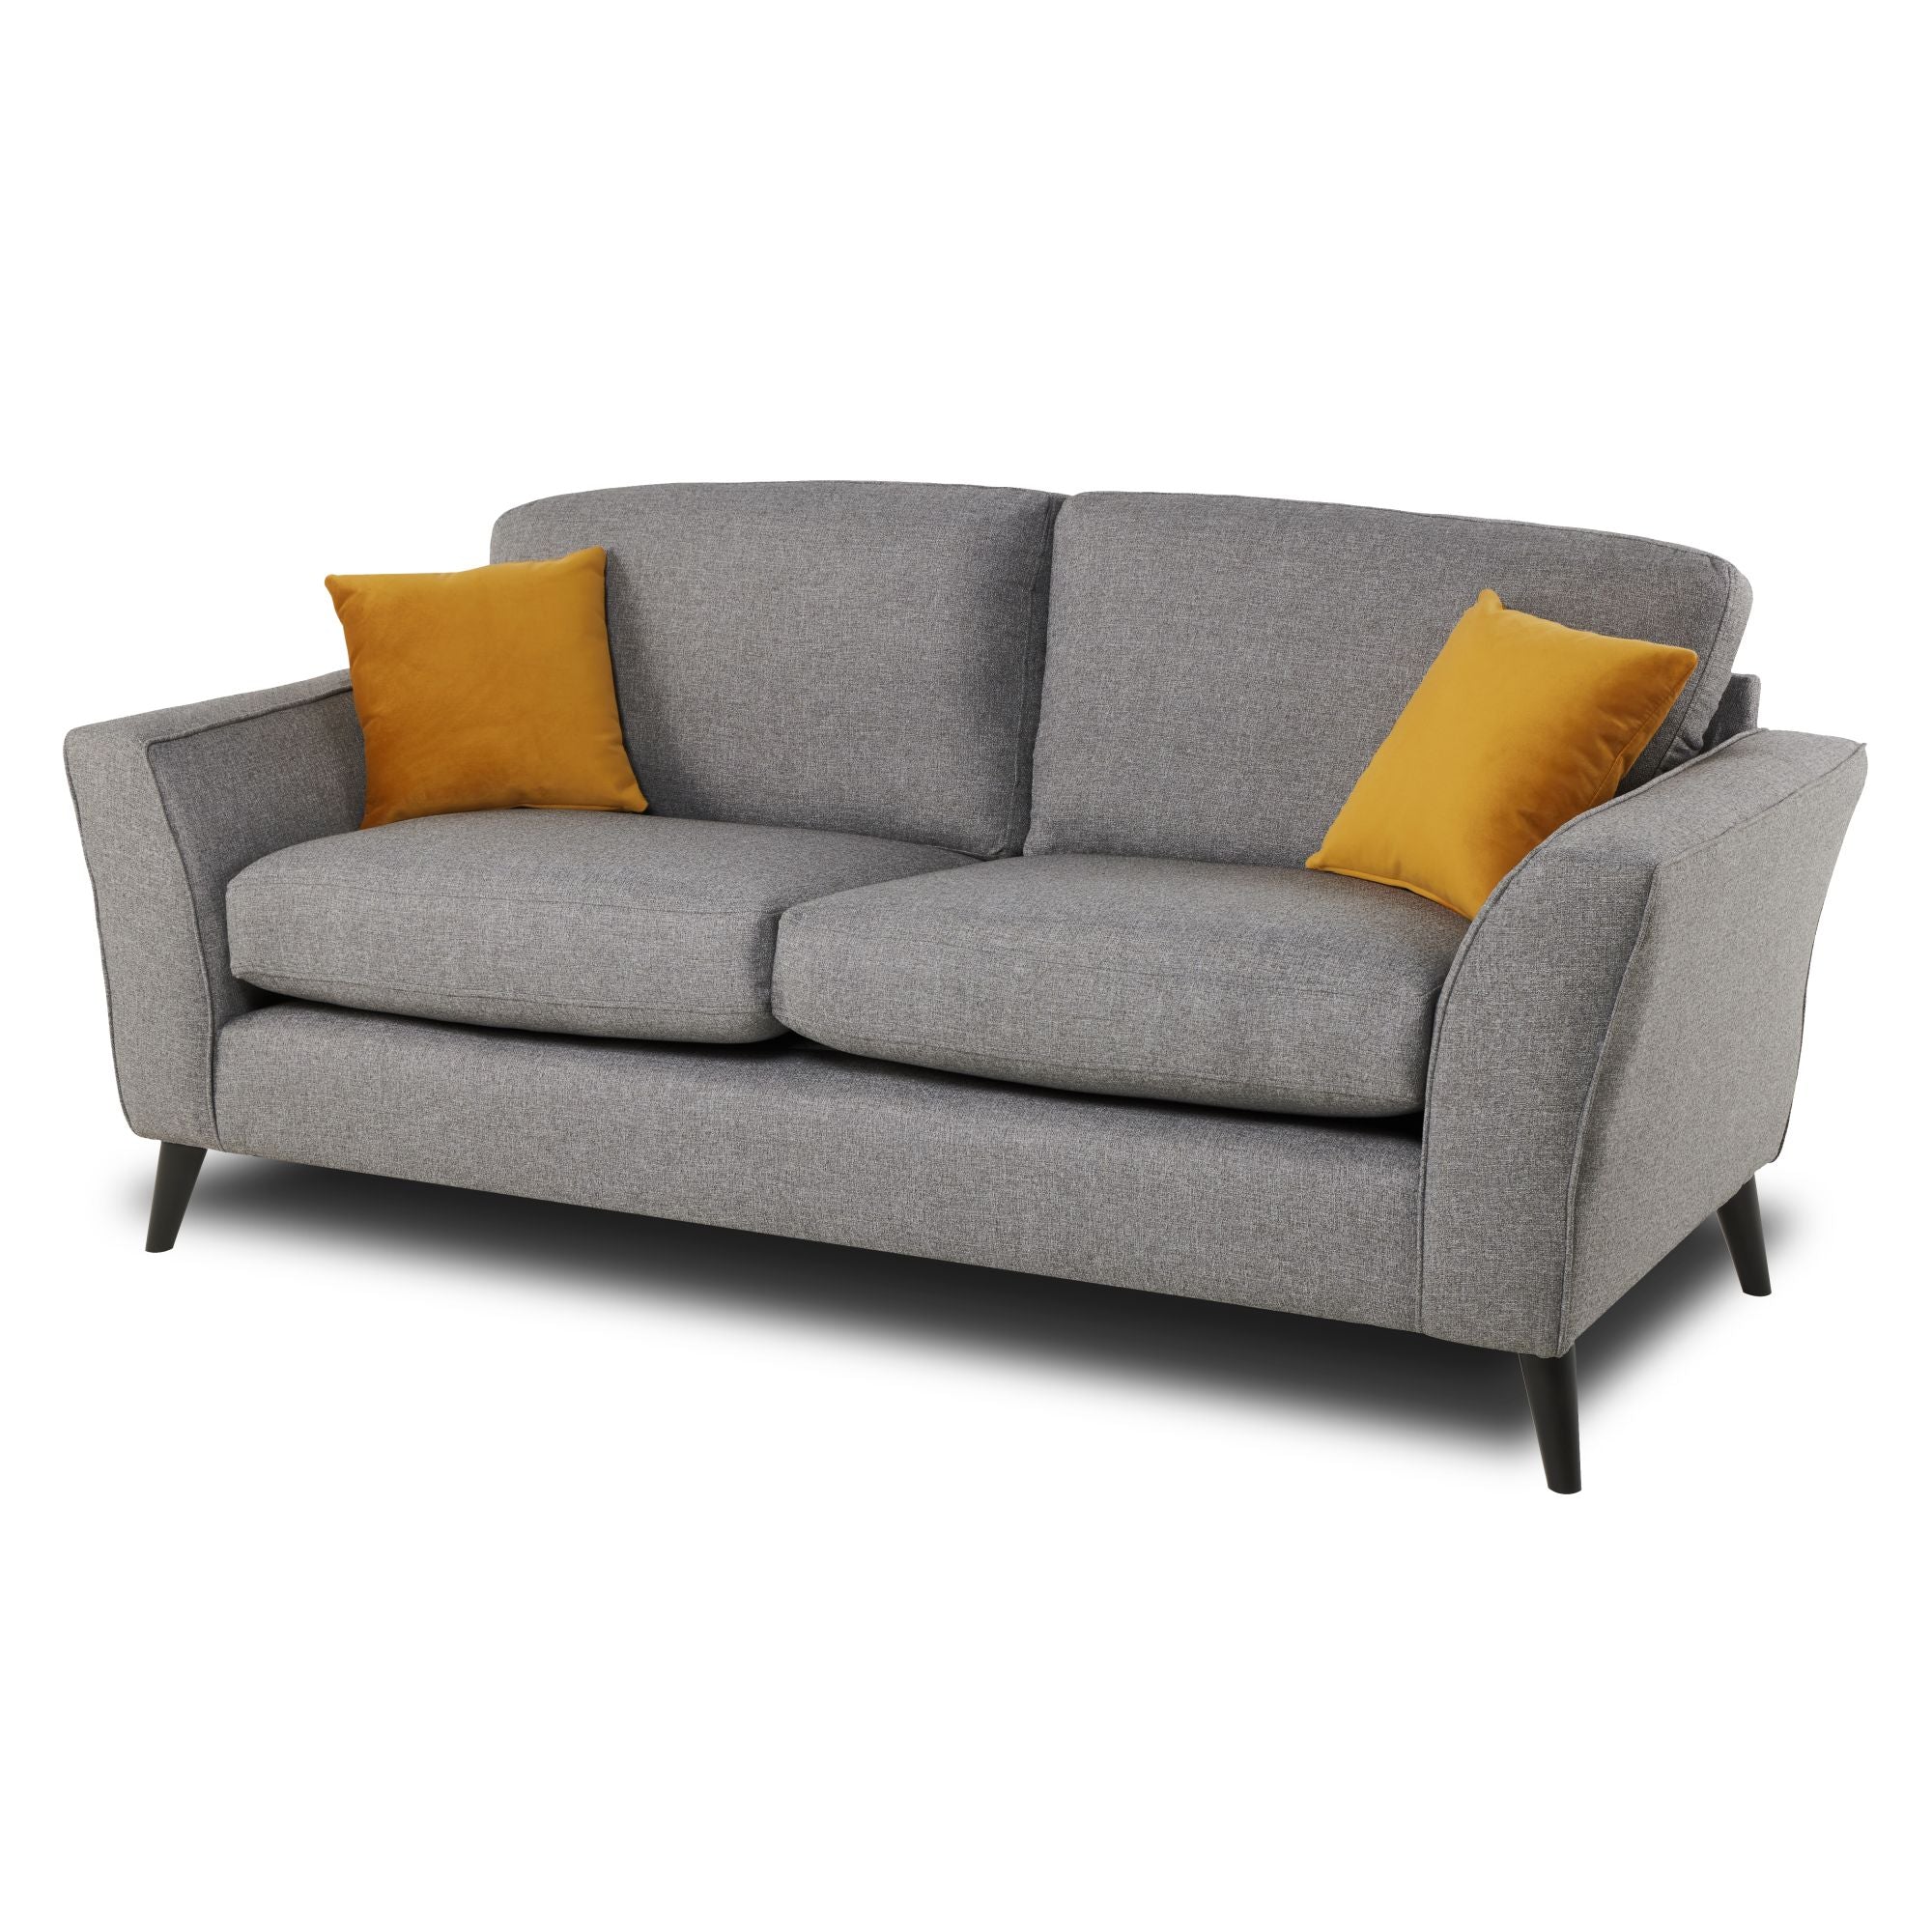 Libby 3 seater sofa in charcoal on an angle with a white background 